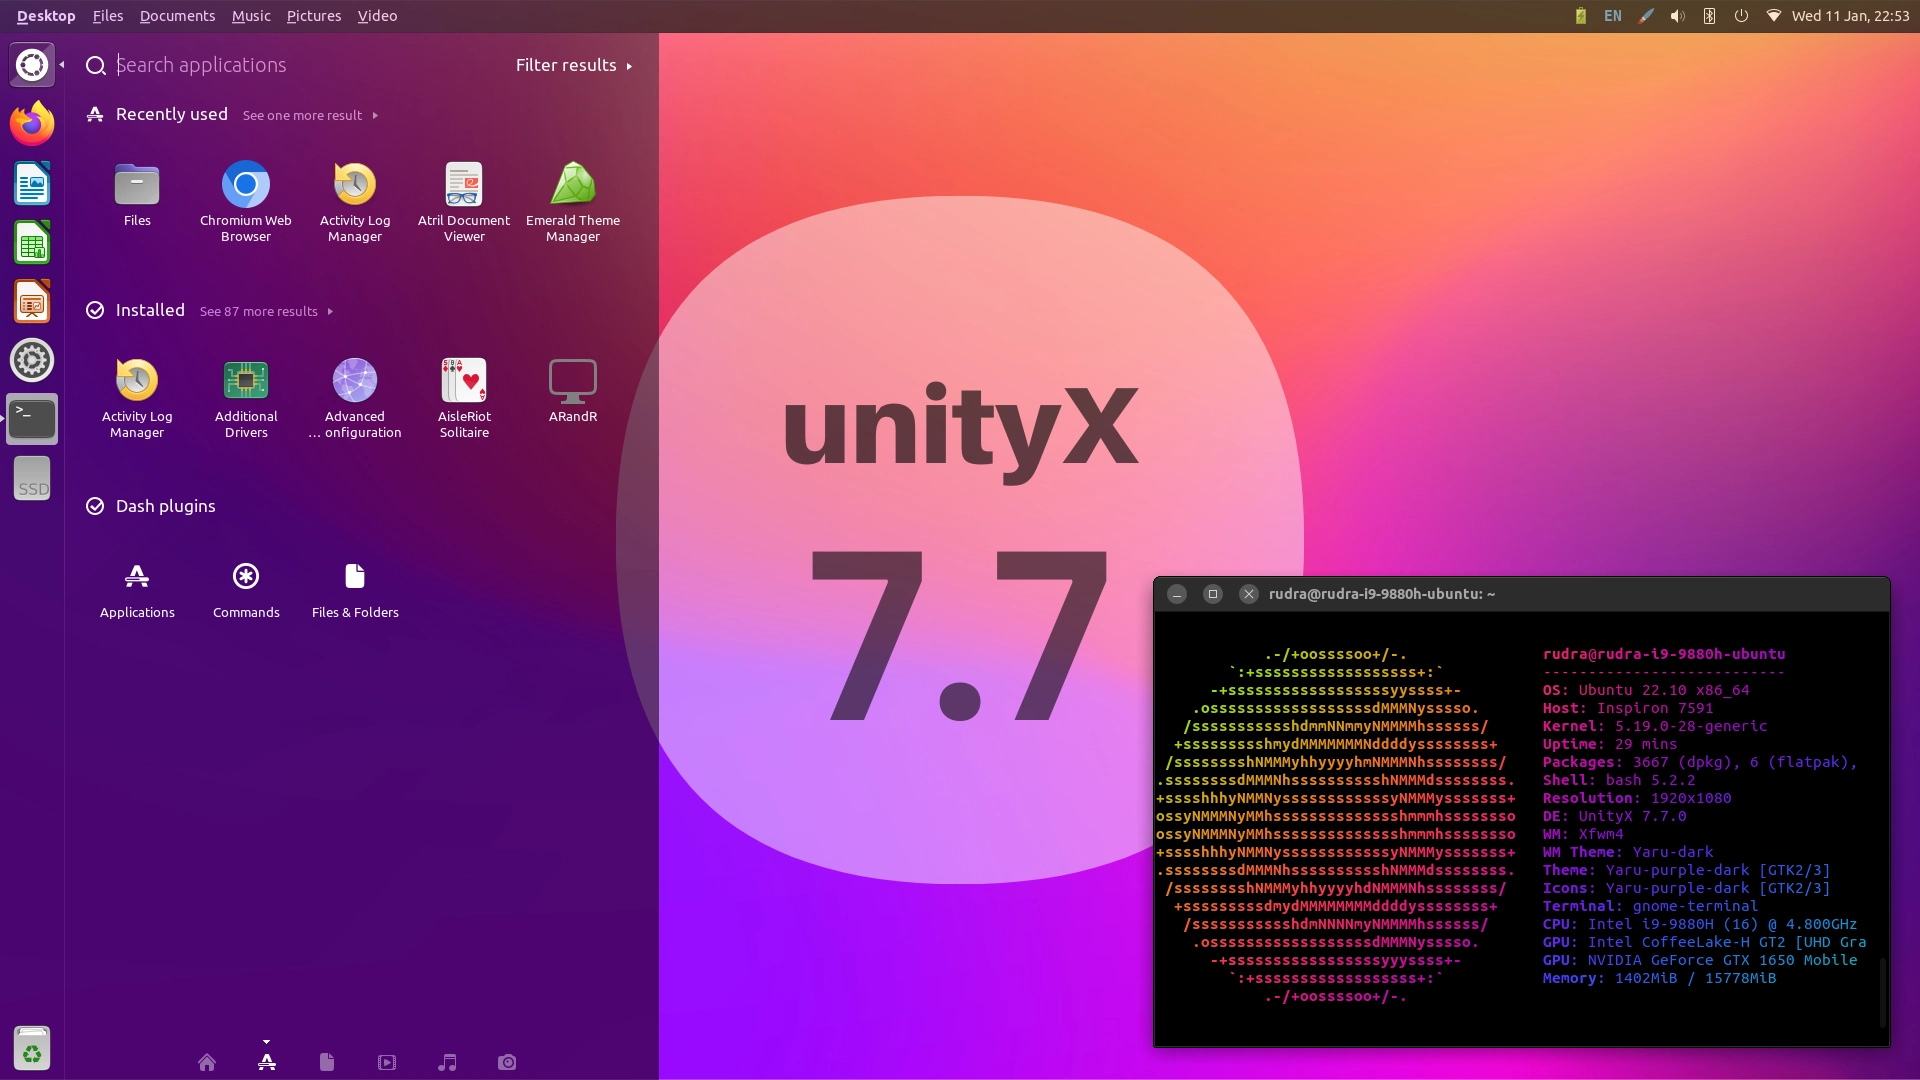 Unity 7.7 Desktop Environment to Get a UnityX Flavor with Wayland Support